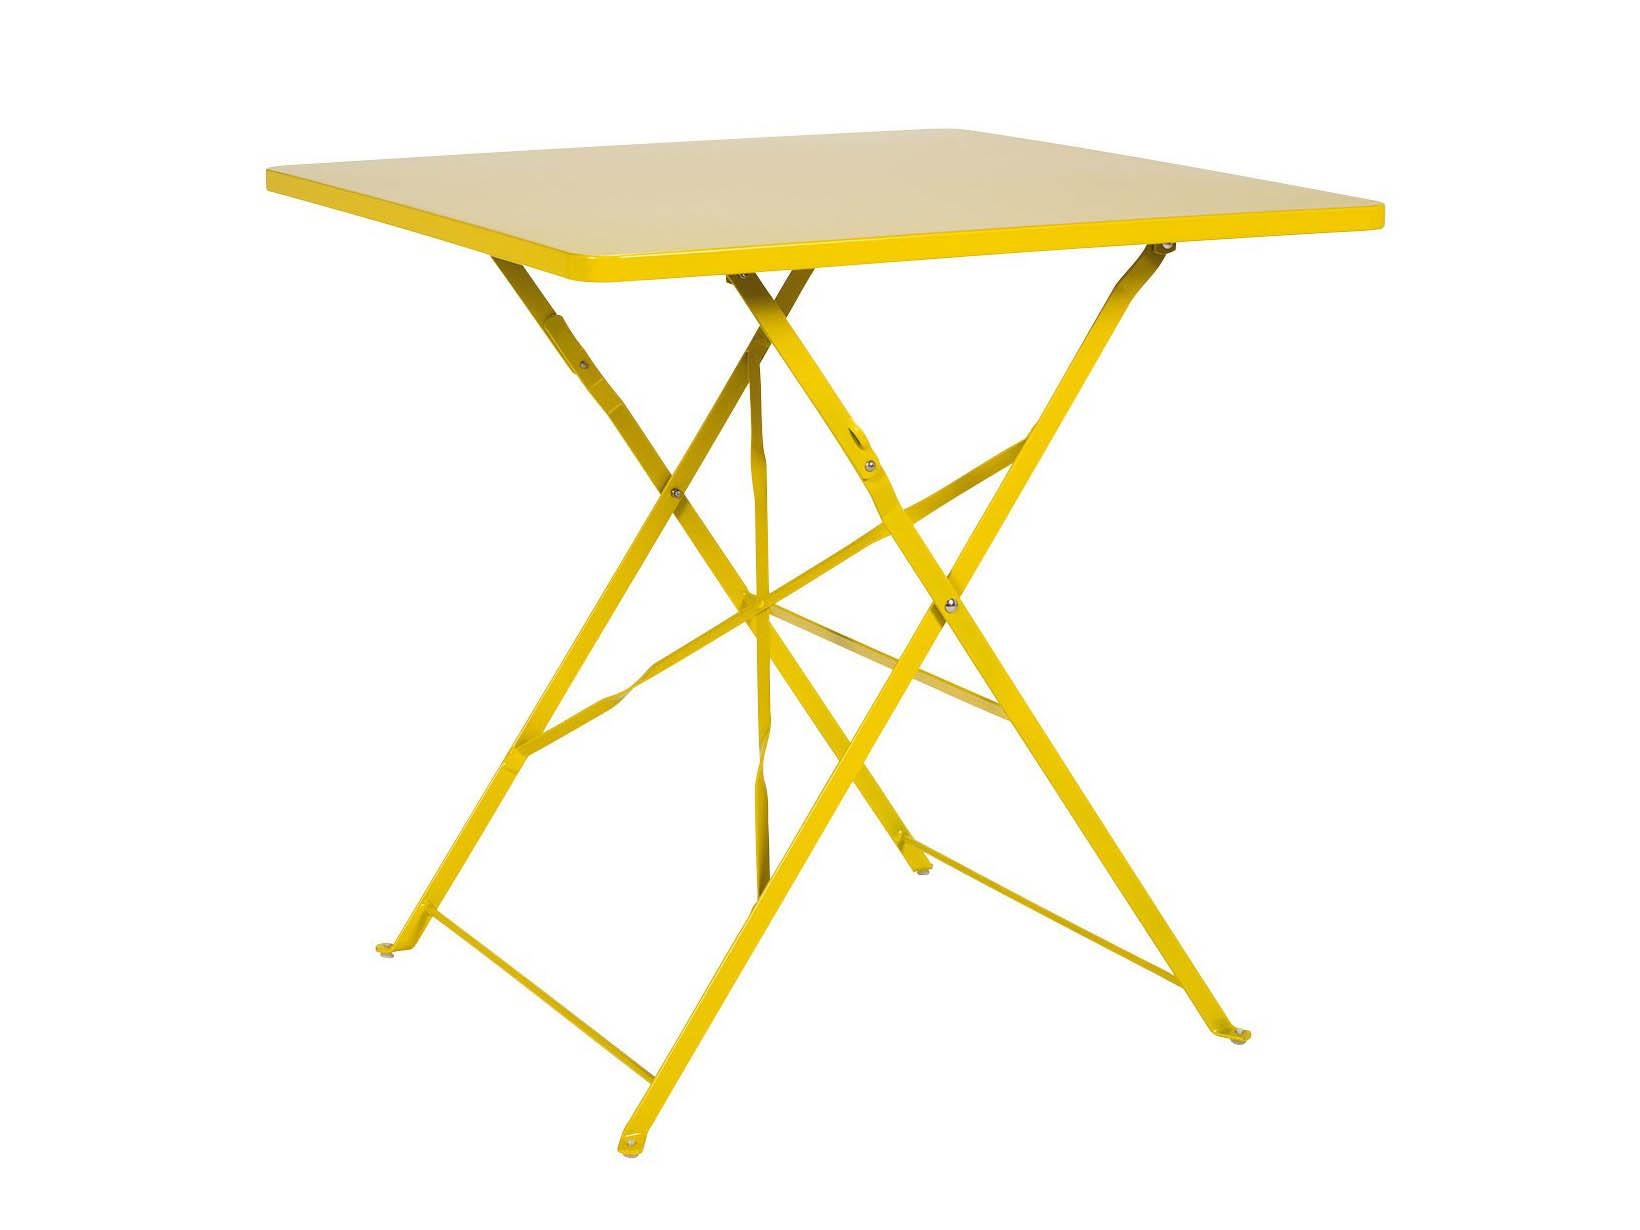 Best Outdoor Table That Is Weatherproof Easy To Clean And Durable